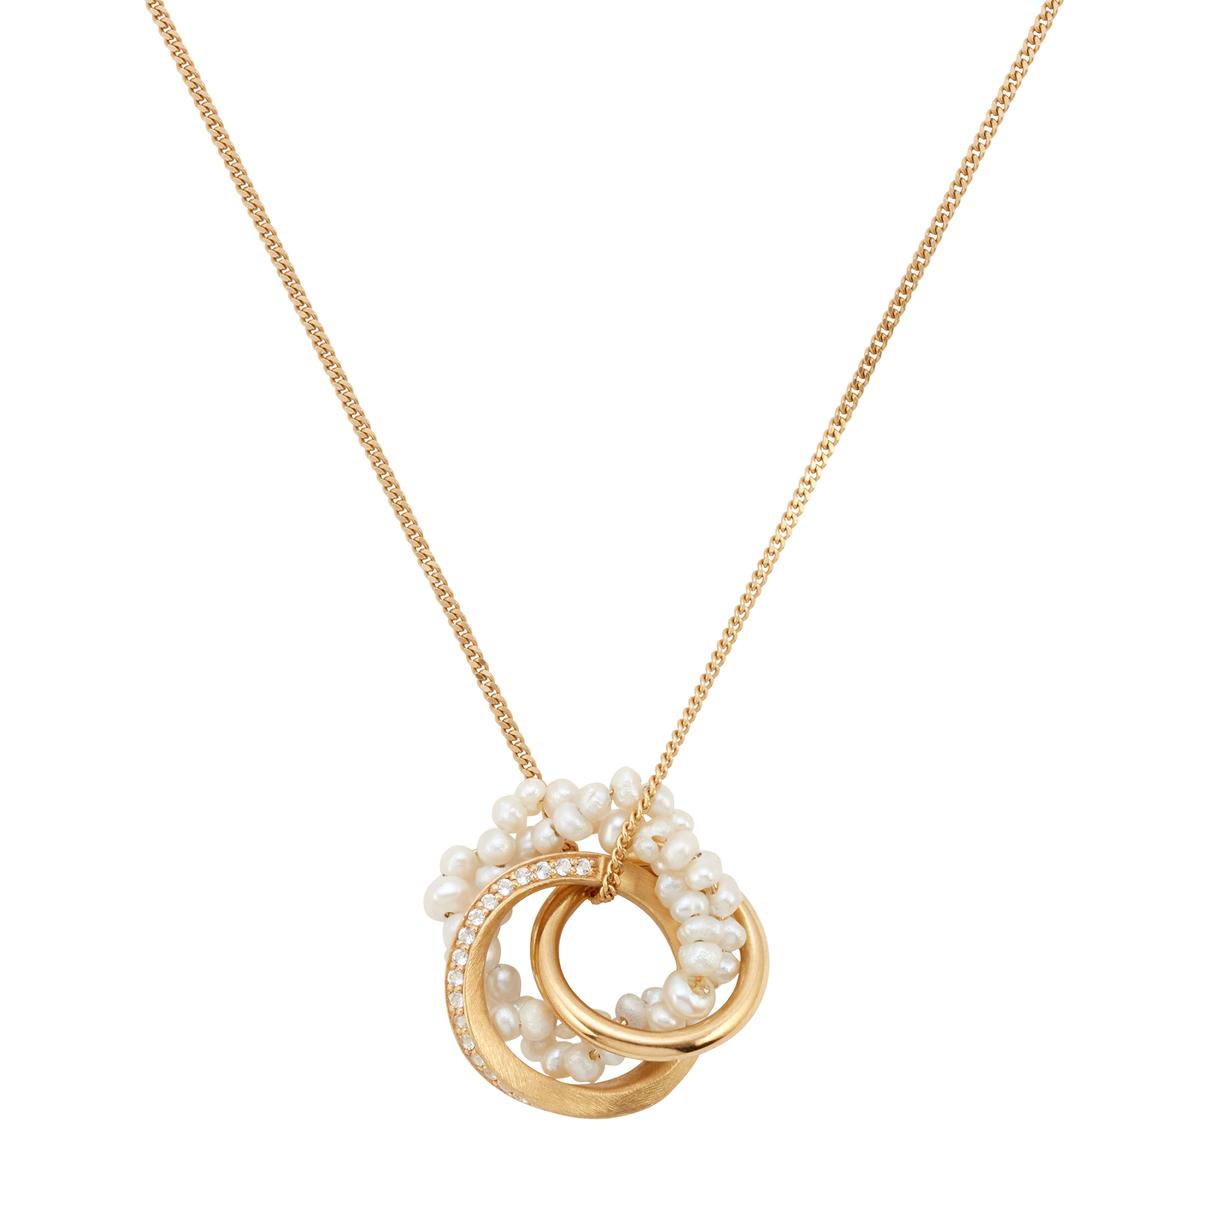 Completedworks Gold, White Topaz, and Pearl Pendant Necklace